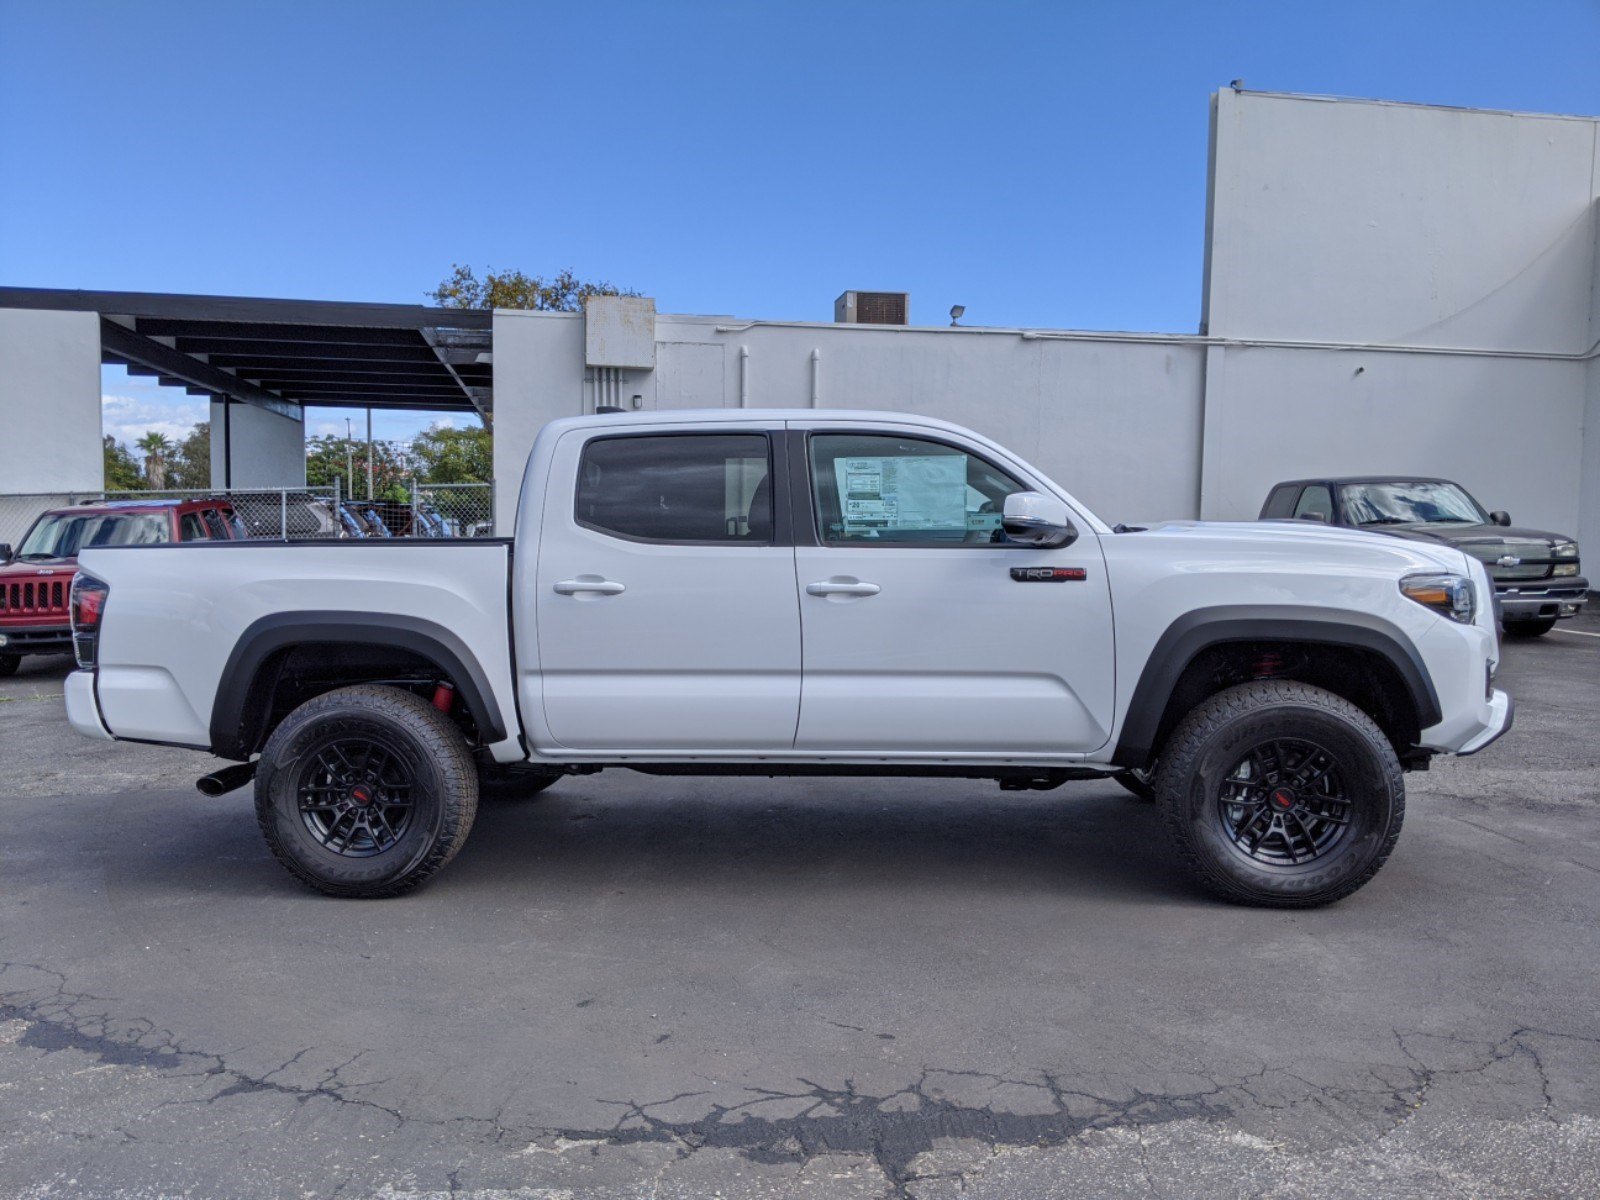 New 2020 Toyota Tacoma 4wd Trd Pro Double Cab In Long Beach 13463